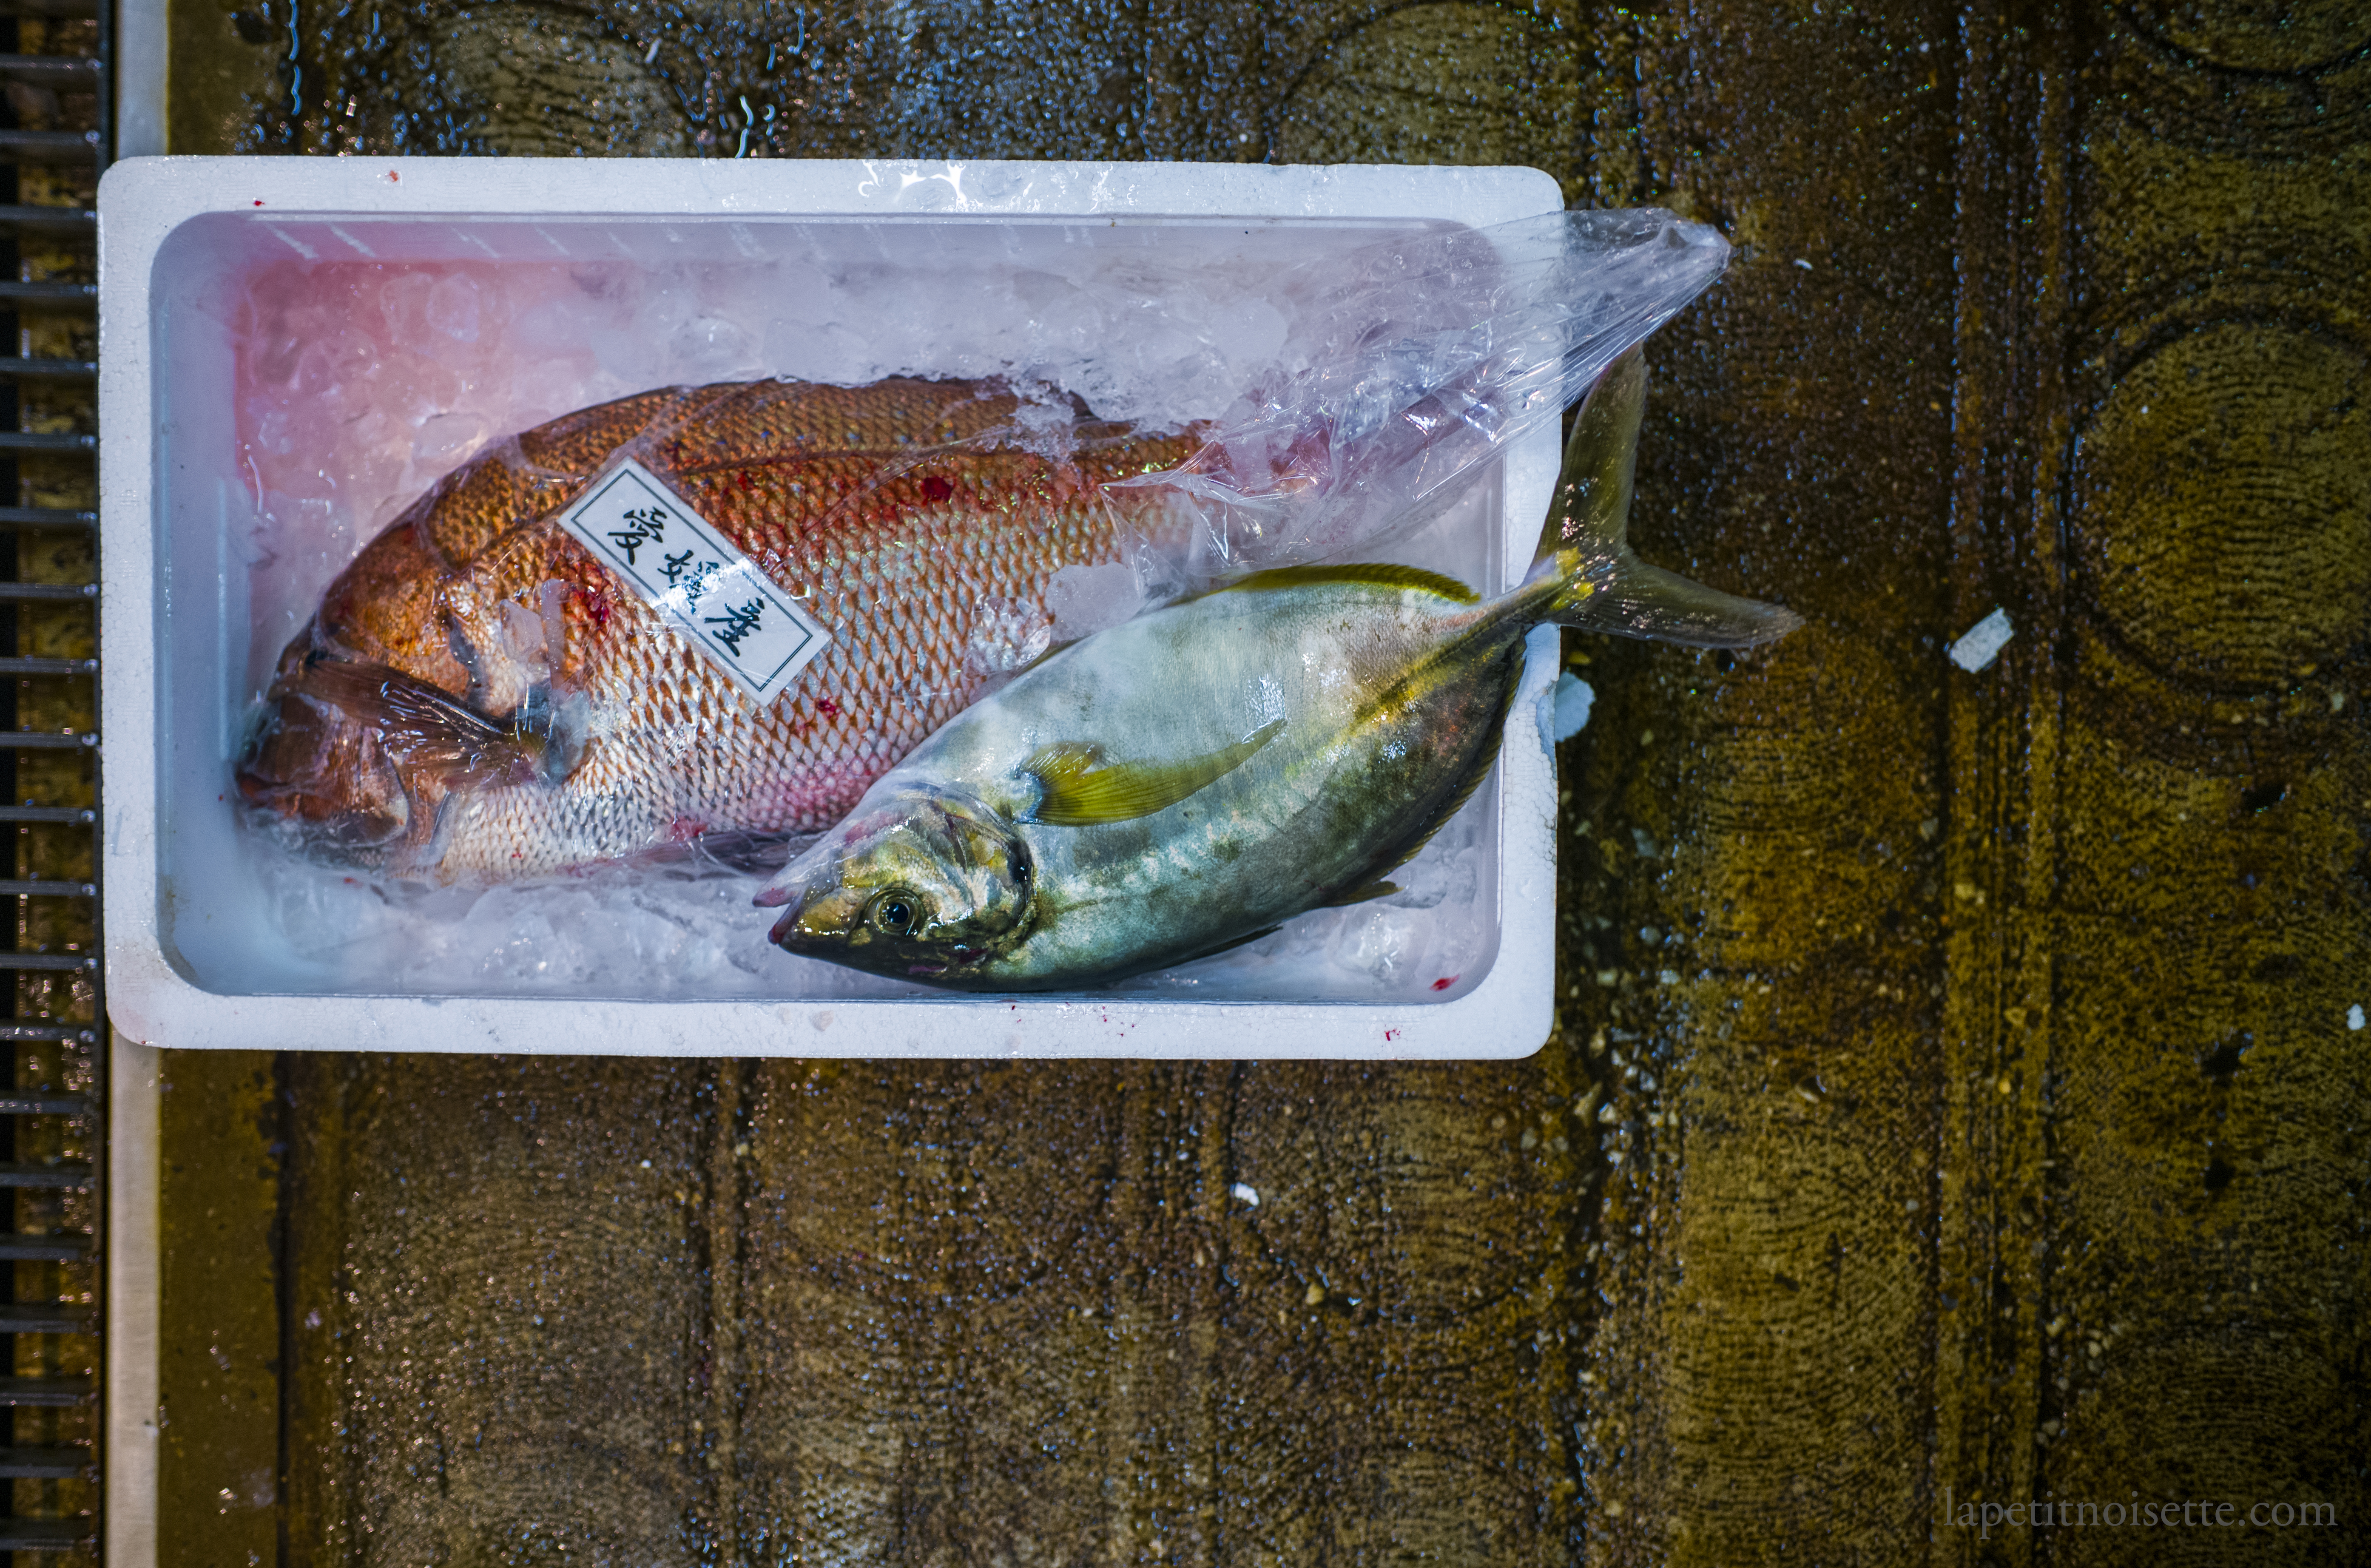 Wild Shima Aji from Ehime prefecture next to a Tai fish in a box at a Japanese fish market.